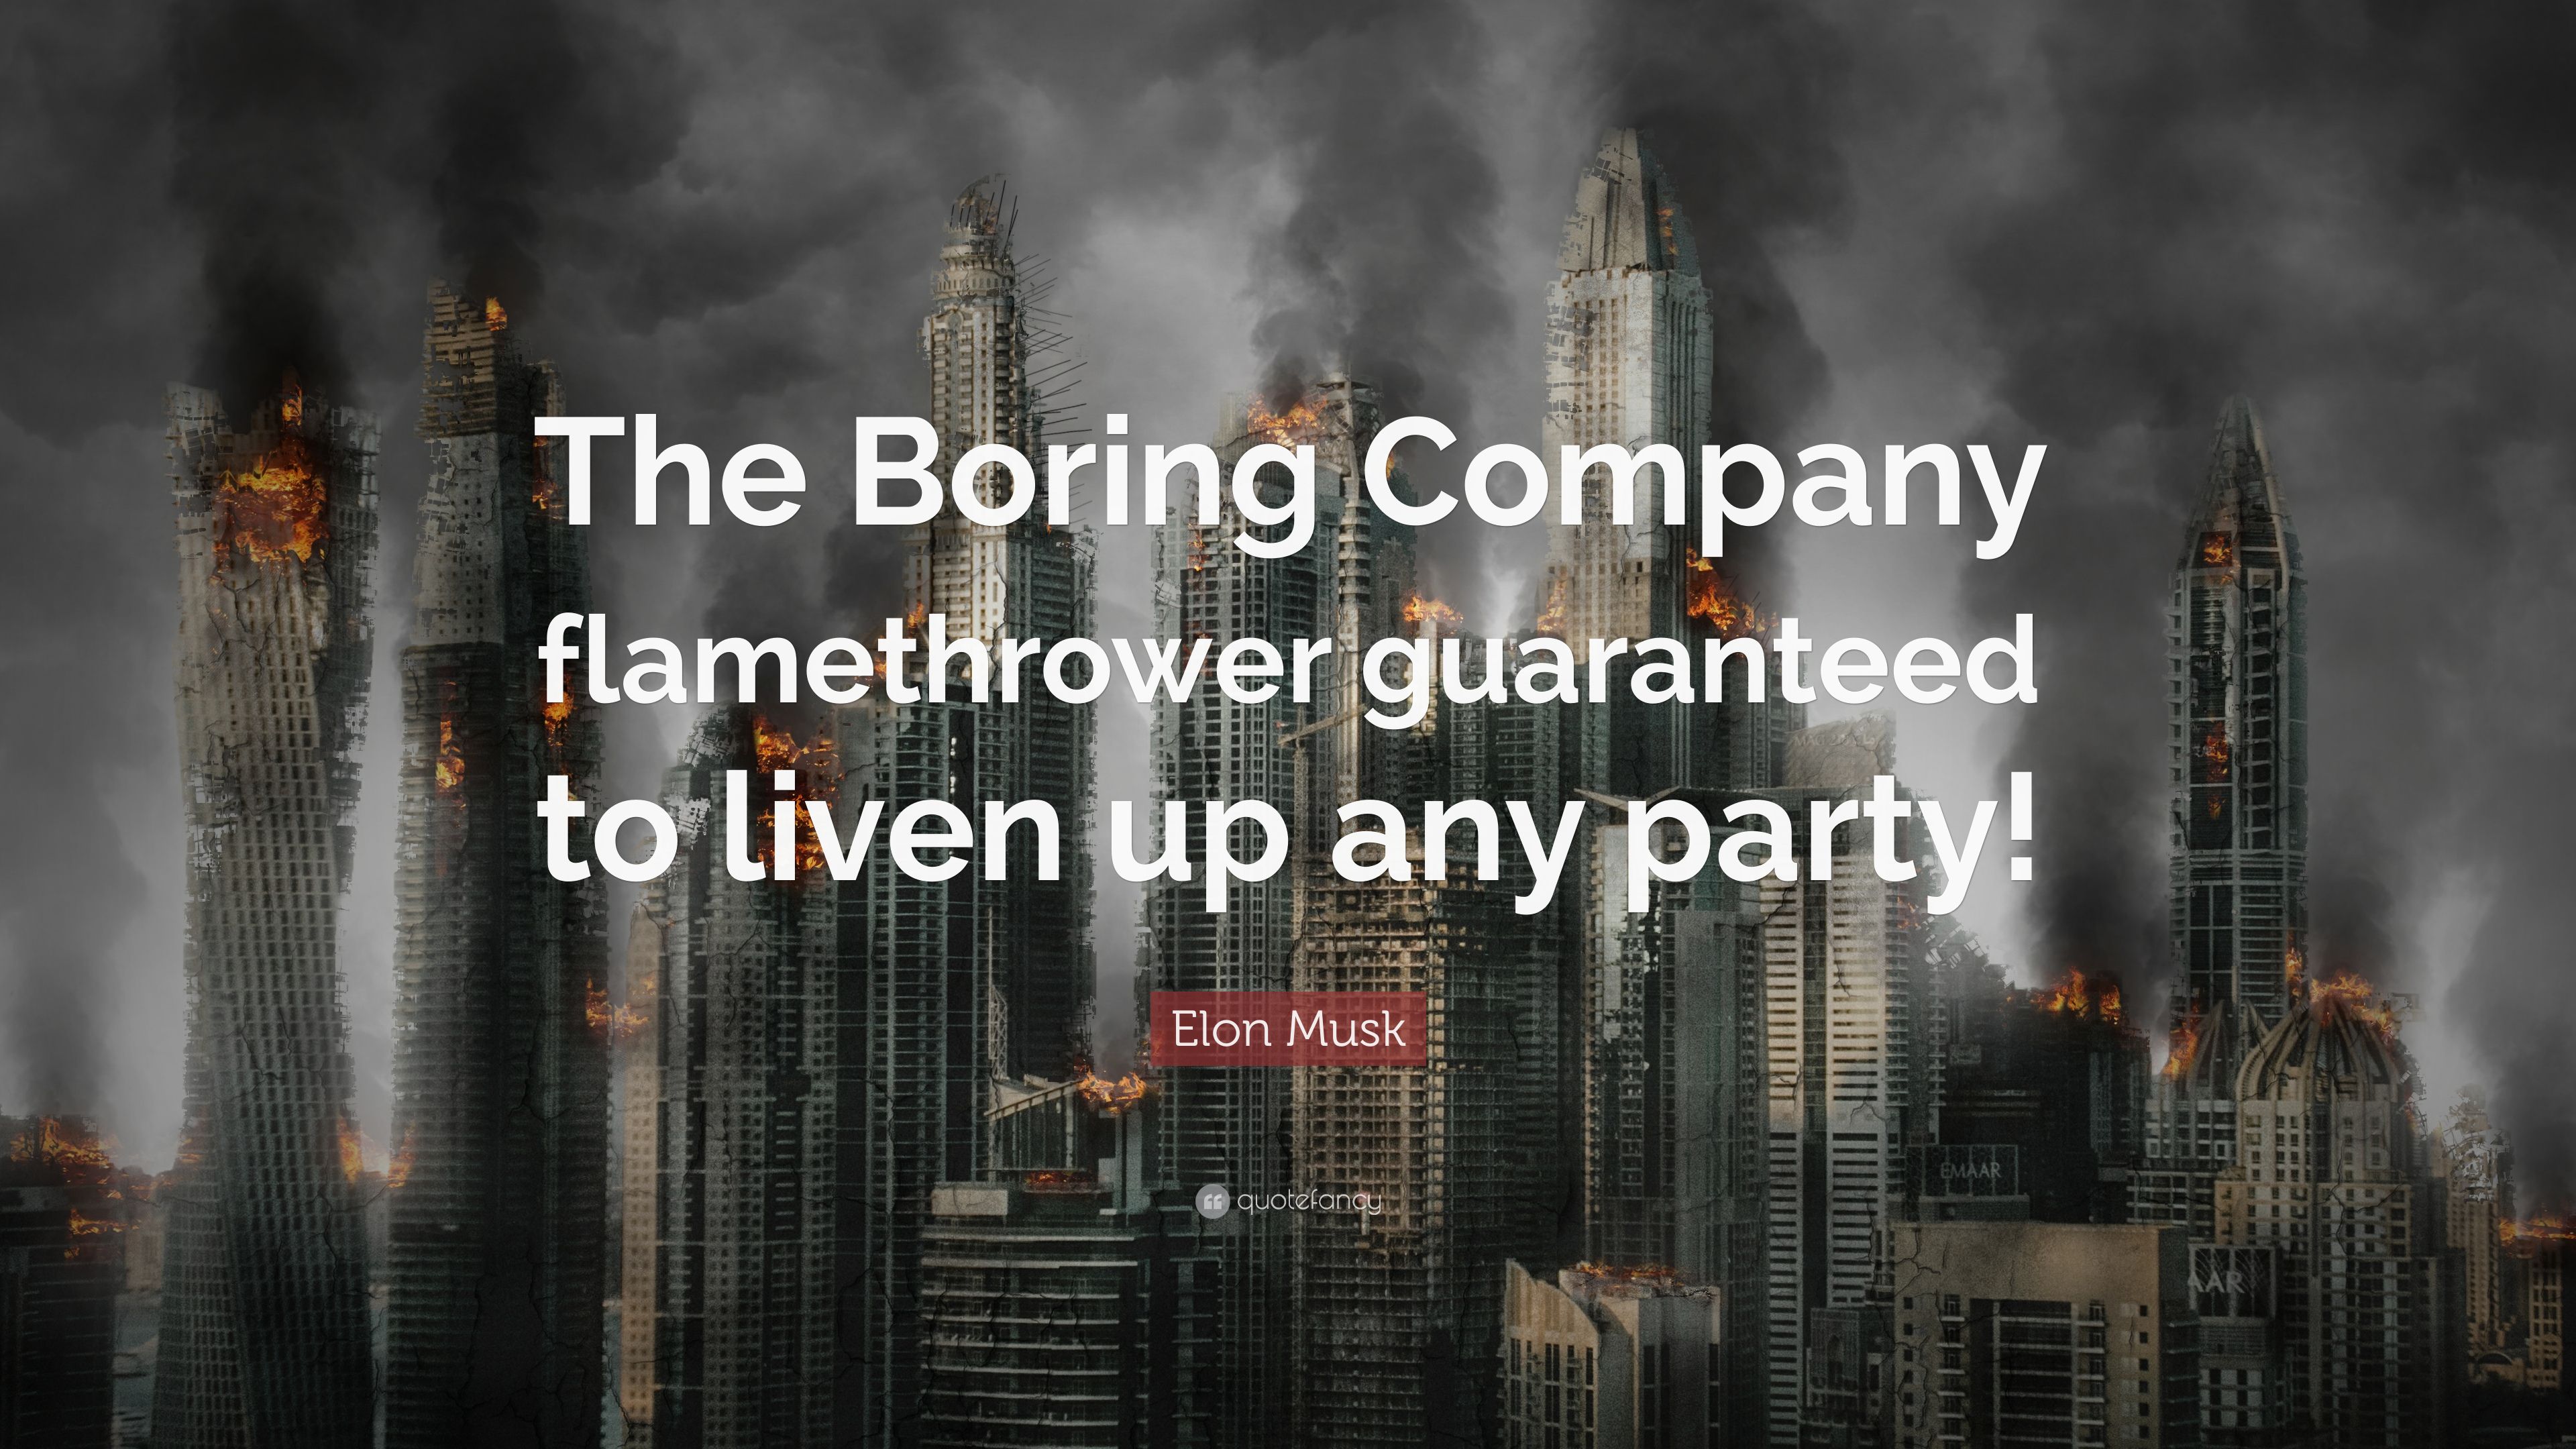 Elon Musk Quote: “The Boring Company flamethrower guaranteed to liven up any party!”